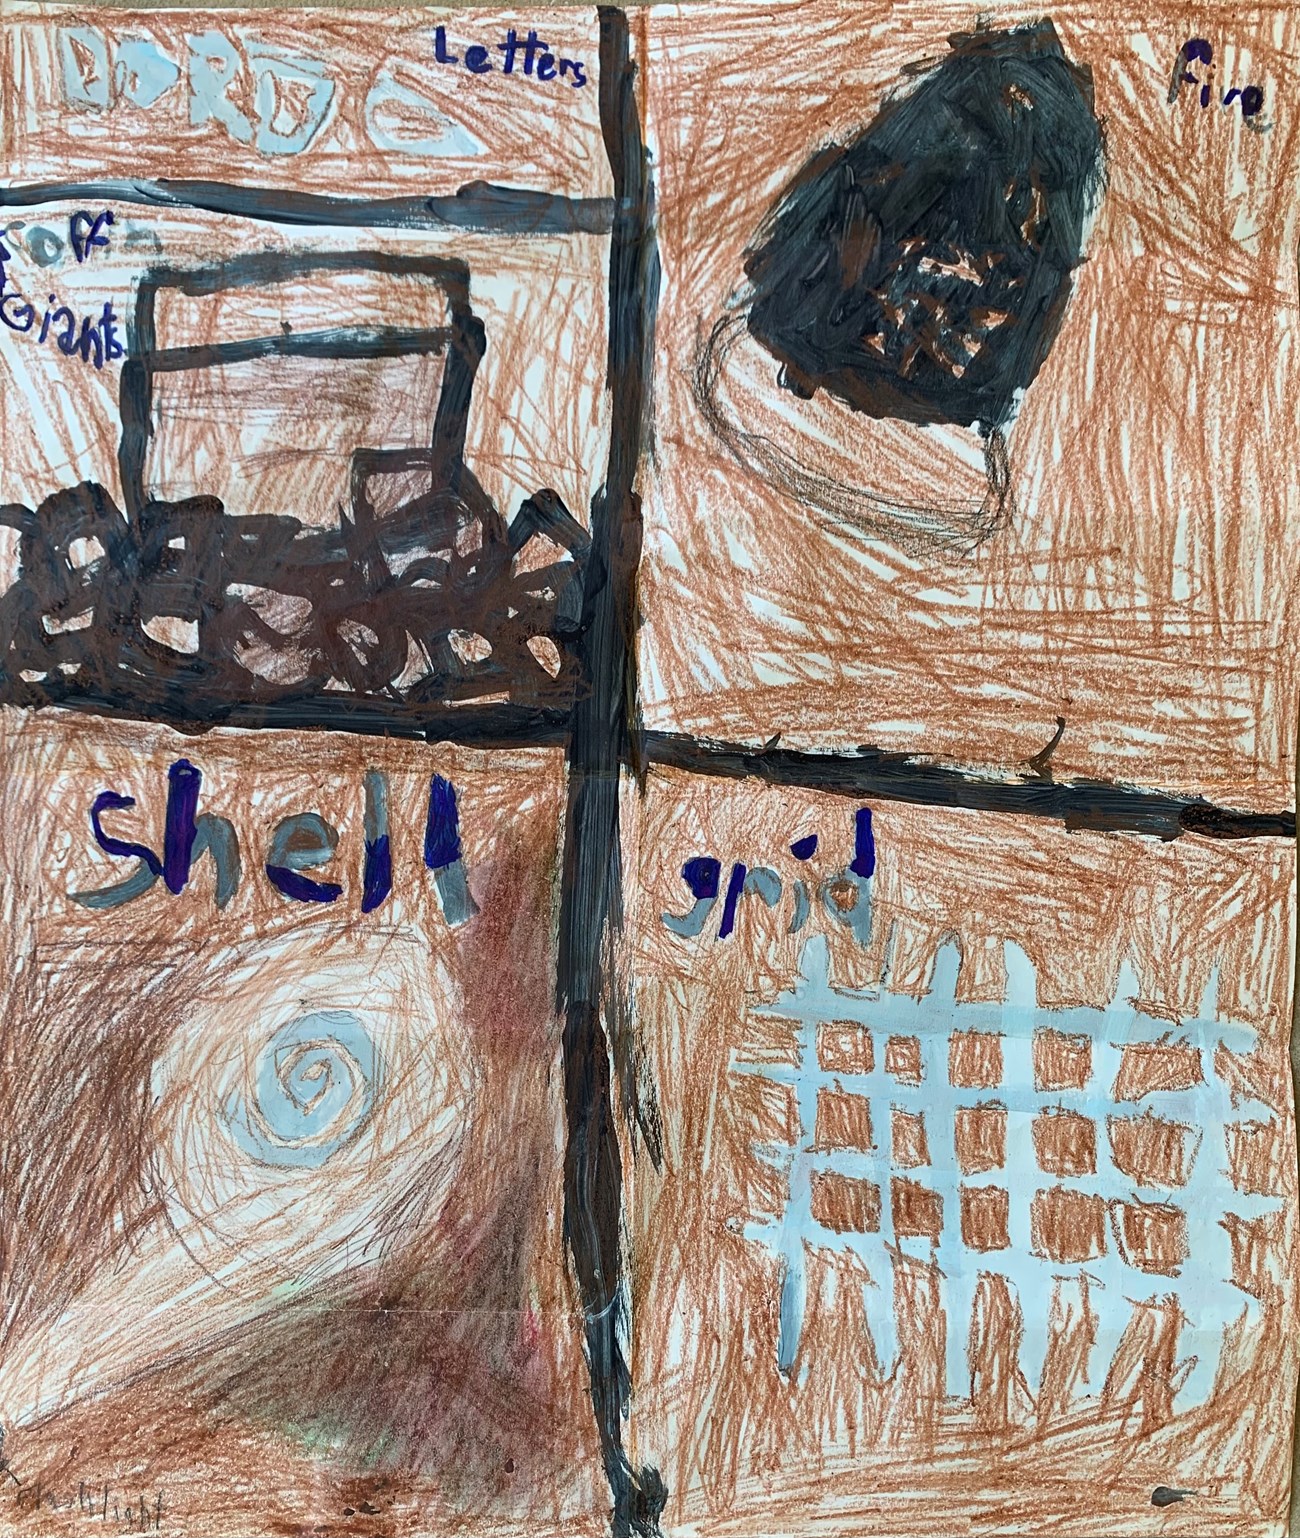 Crayon drawing shows 4 quadrants depicting a door to the cave, an animal, a fossil, and ancient petroglyph.